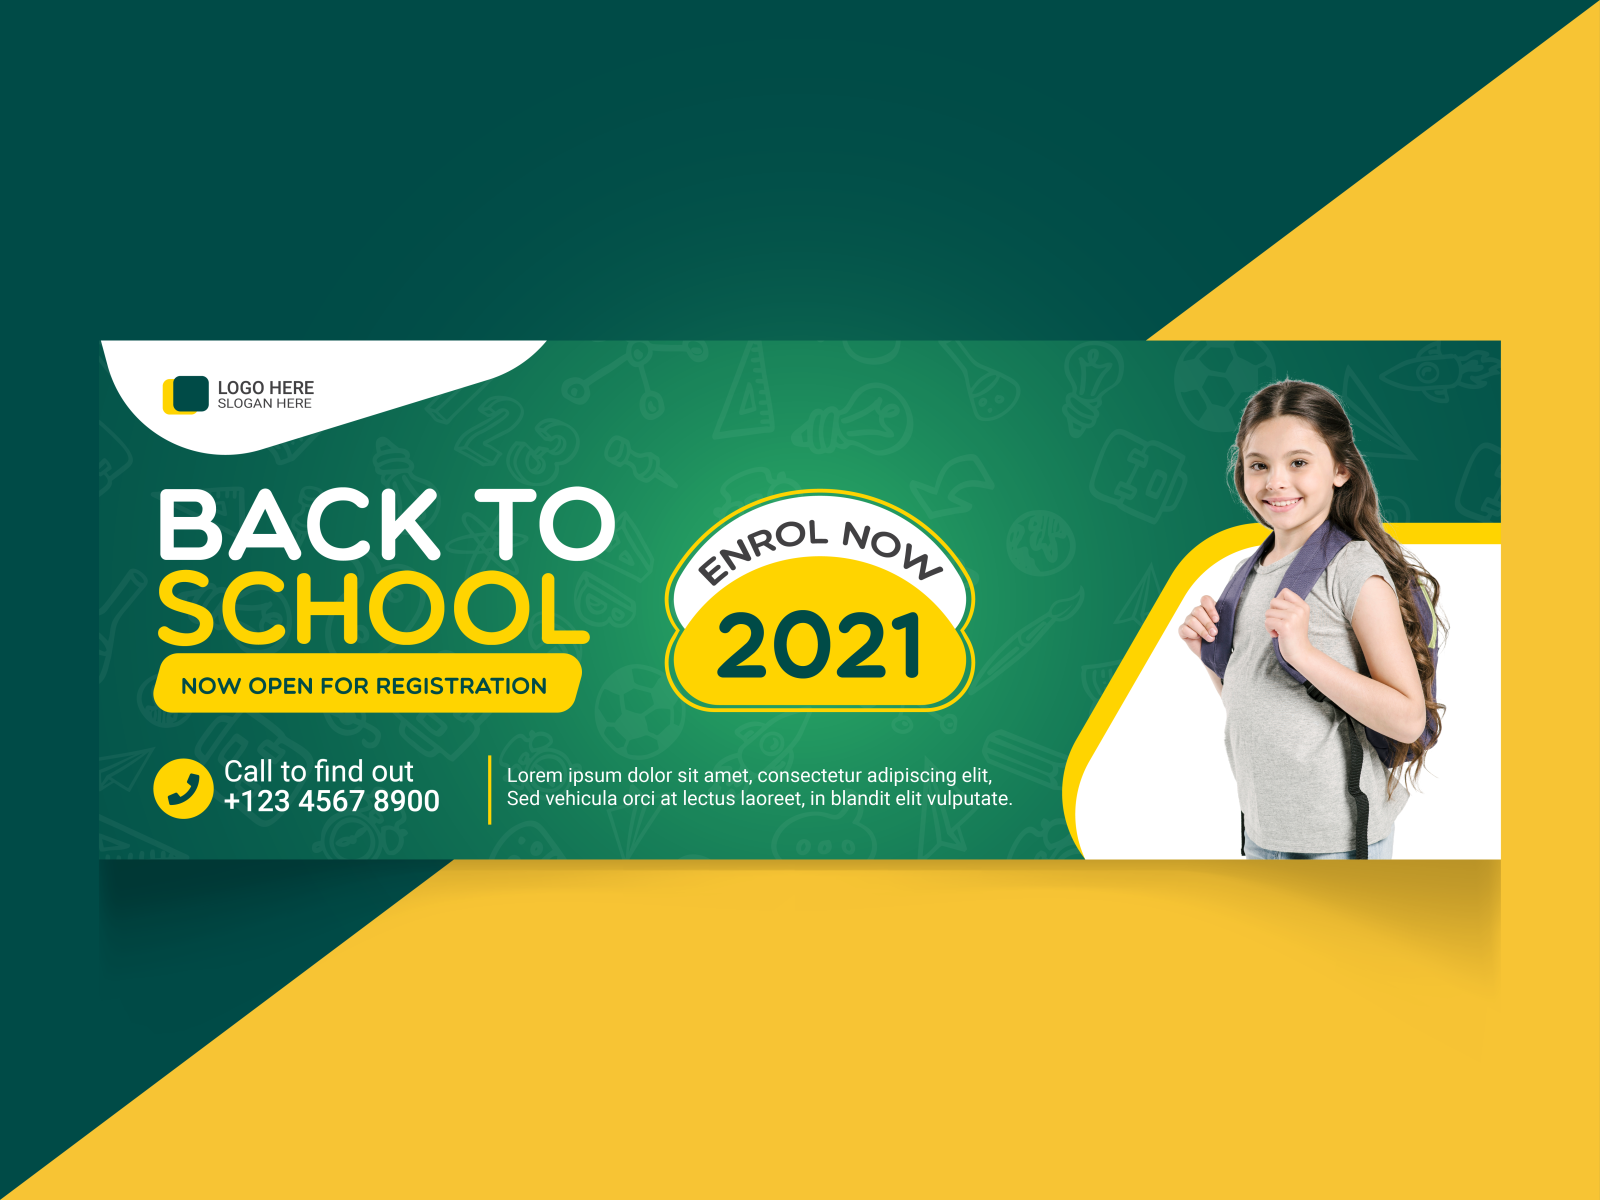 Back To School Facebook Cover Template By Md Yeasin Hossain On Dribbble